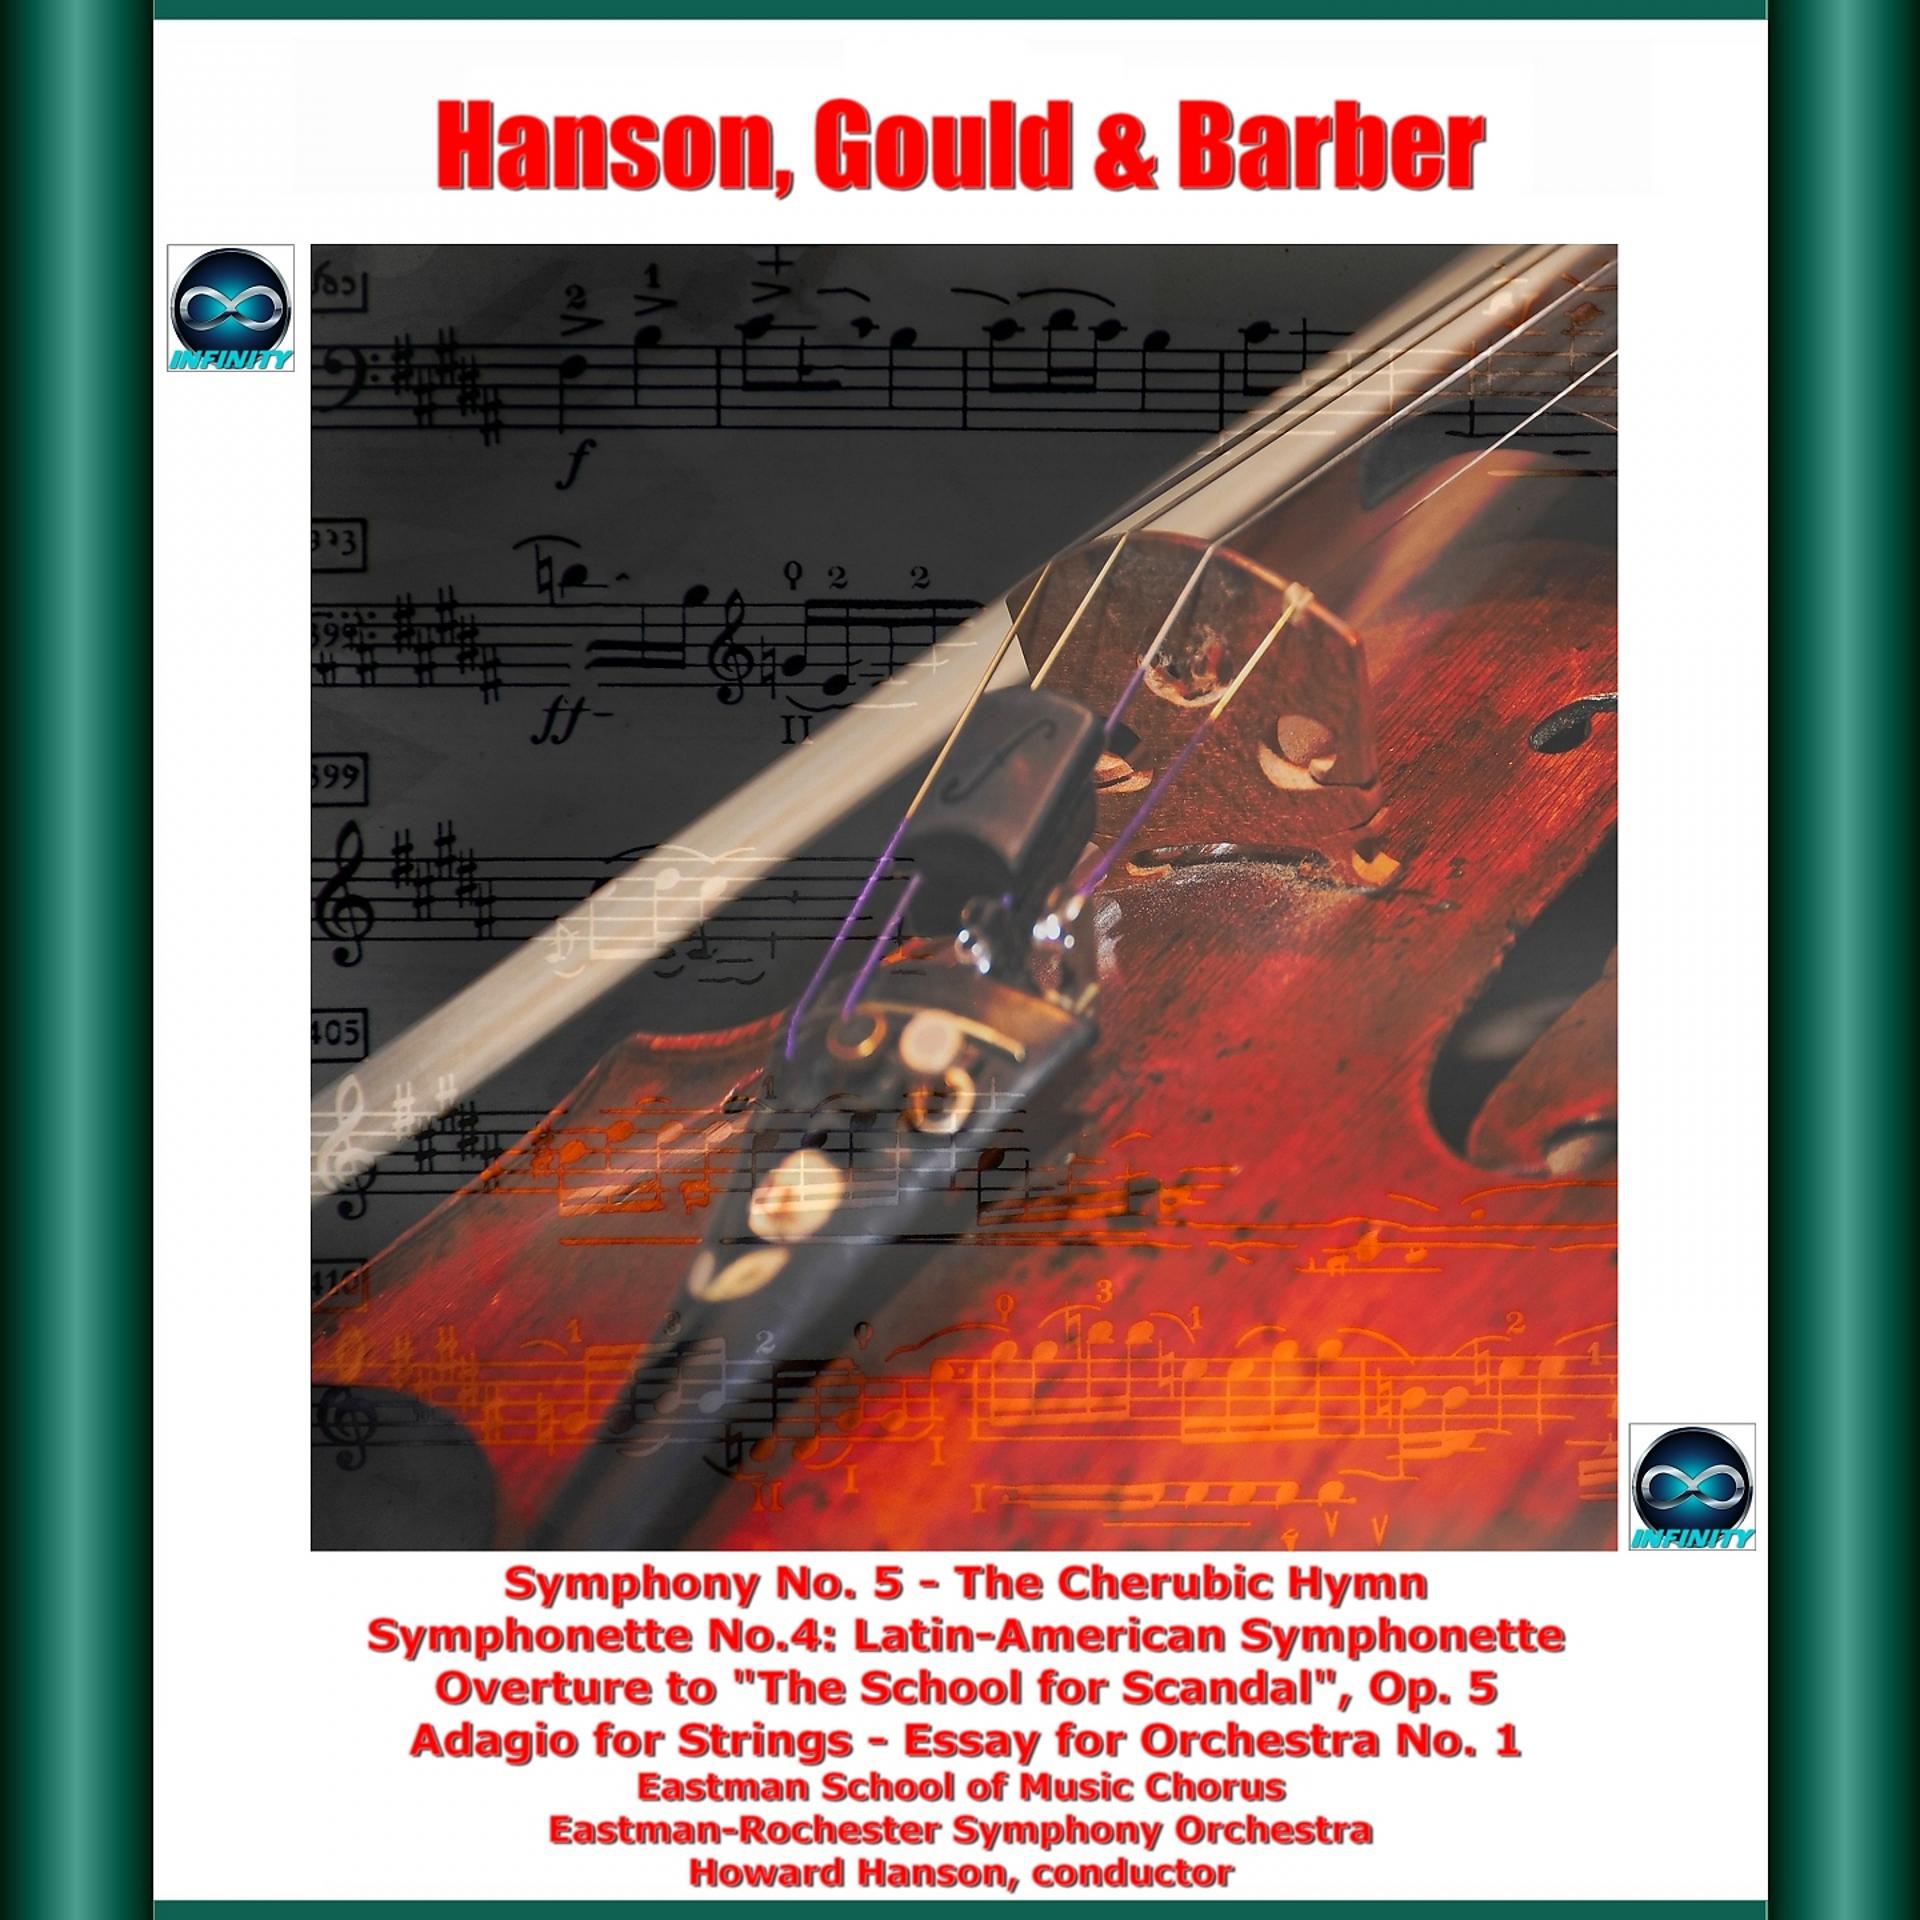 Постер альбома Hanson, Gould & Barber: Symphony No. 5 - The Cherubic Hymn - Symphonette No. 4: Latin-American Symphonette - Overture to "The School for Scandal", Op. 5 - Adagio for Strings - Essay for Orchestra No. 1